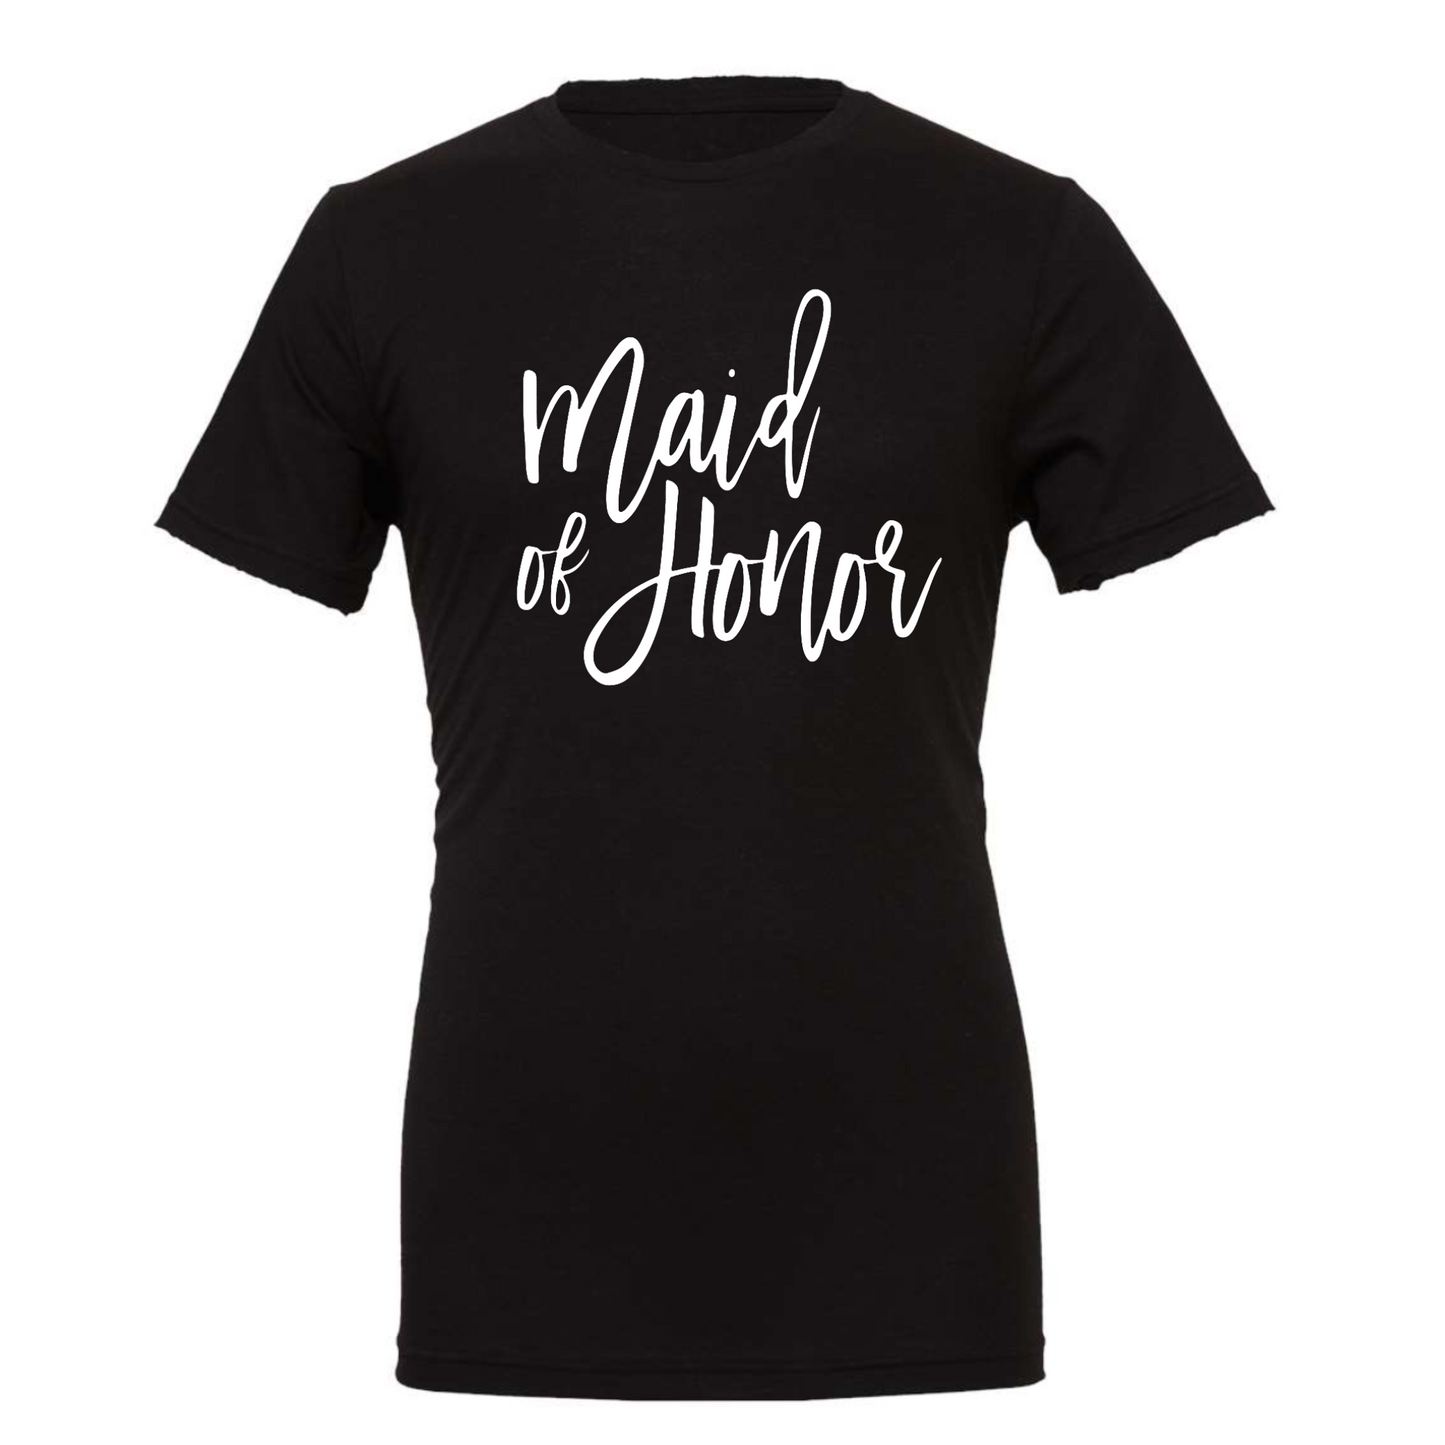 Maid of Honor T-Shirt in black with white script font writing on the front. This is the front view of the shirt.